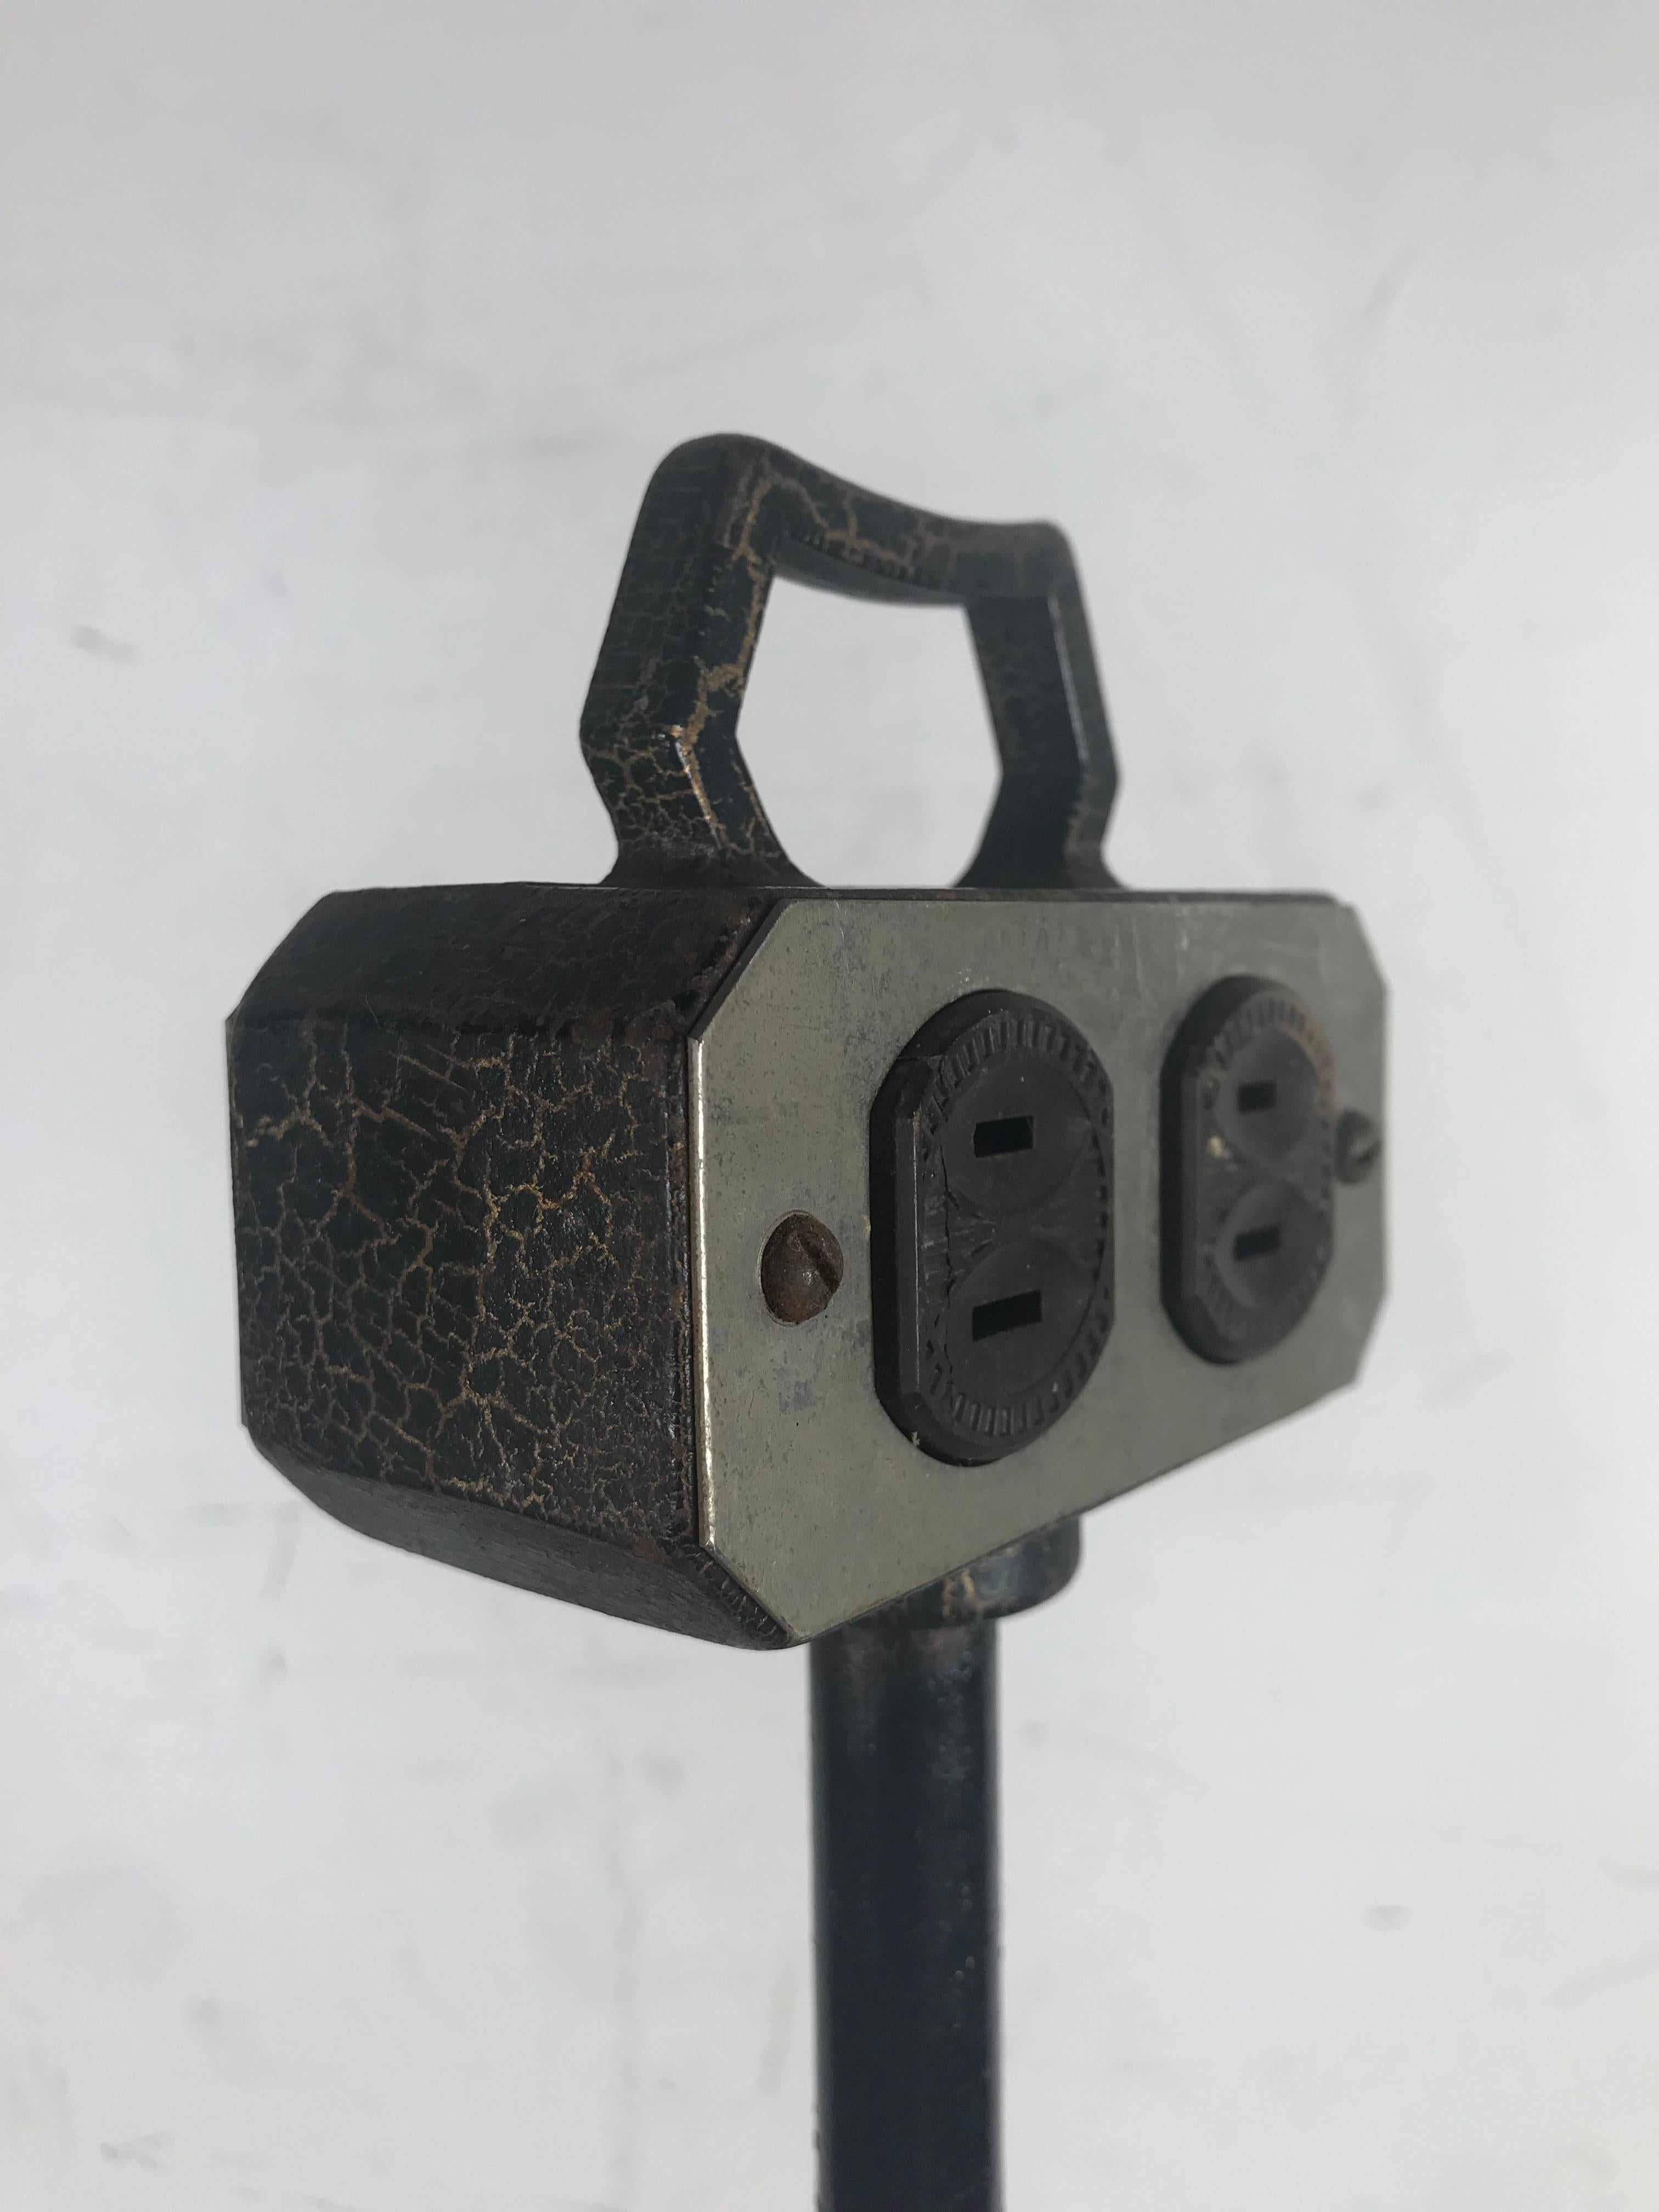 Unusual 1920s standing Art Deco cast iron four outlet extension cord, quirky little item, early electrical, amazing crackle finish metal, double-sided sockets, Art Deco designed cast iron base.